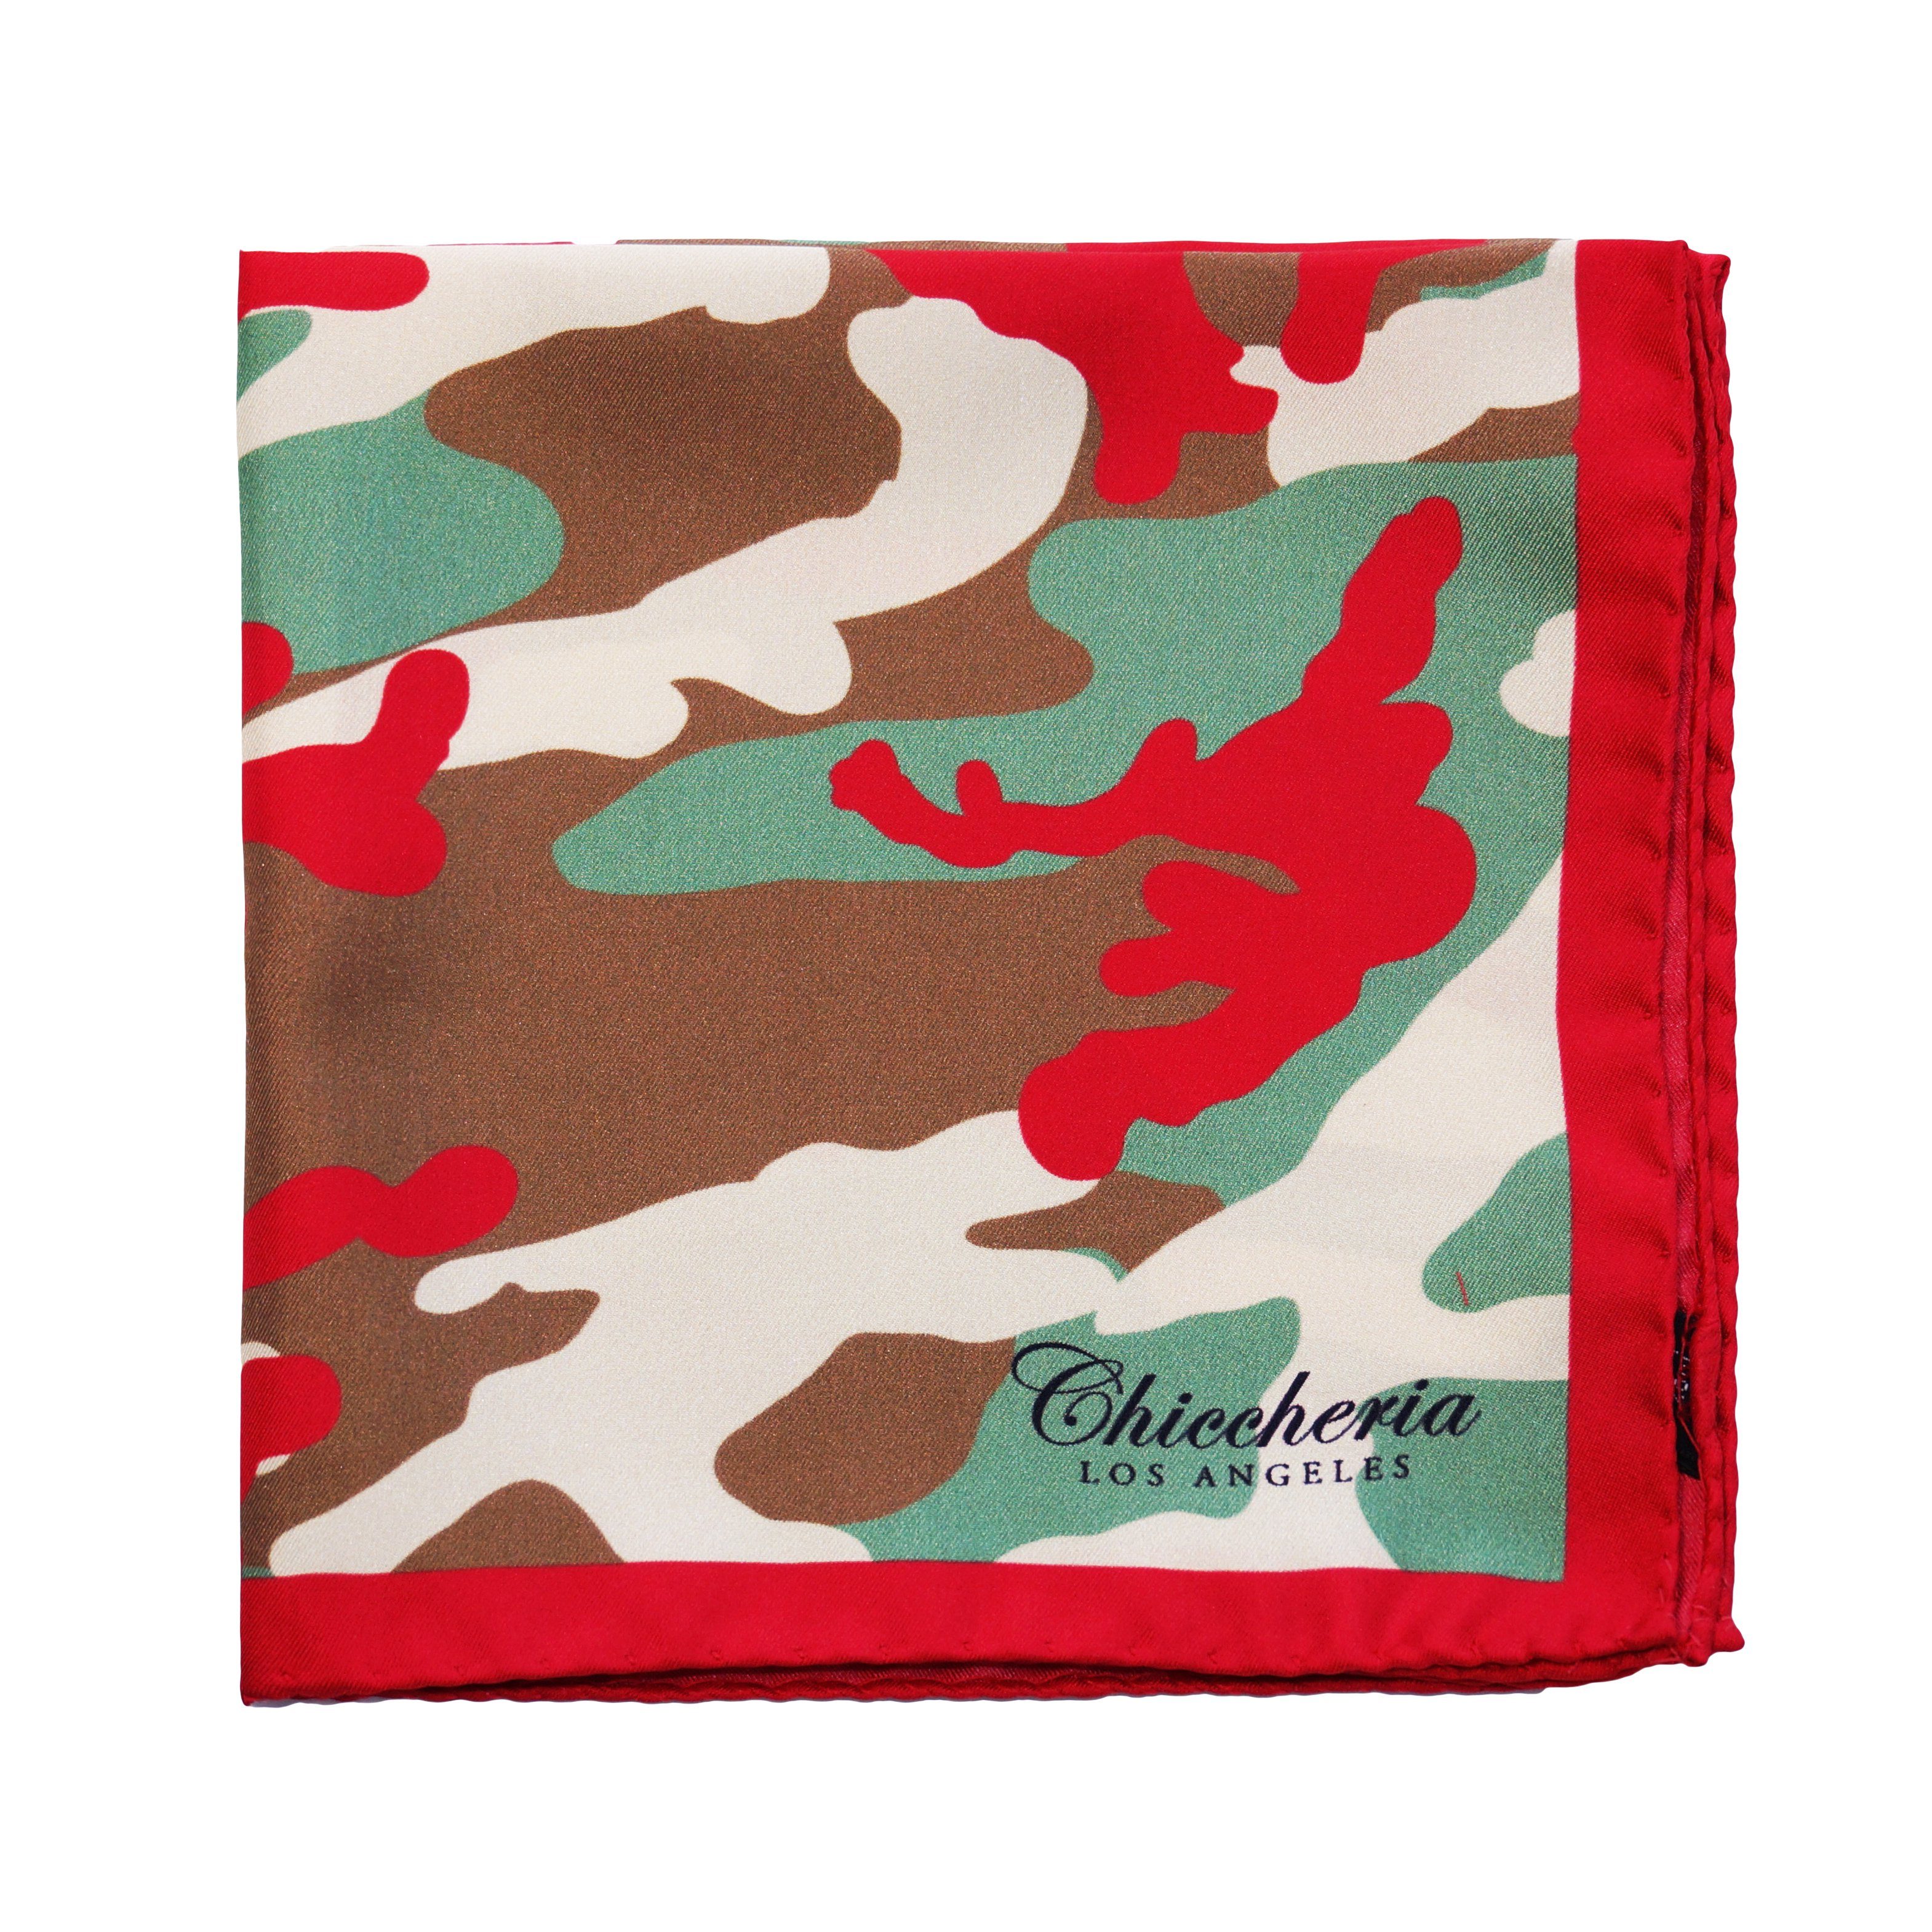 Chiccheria Brand Einstecktuch CAMO, Made in Italy, Camouflage, 100% Seide Rot